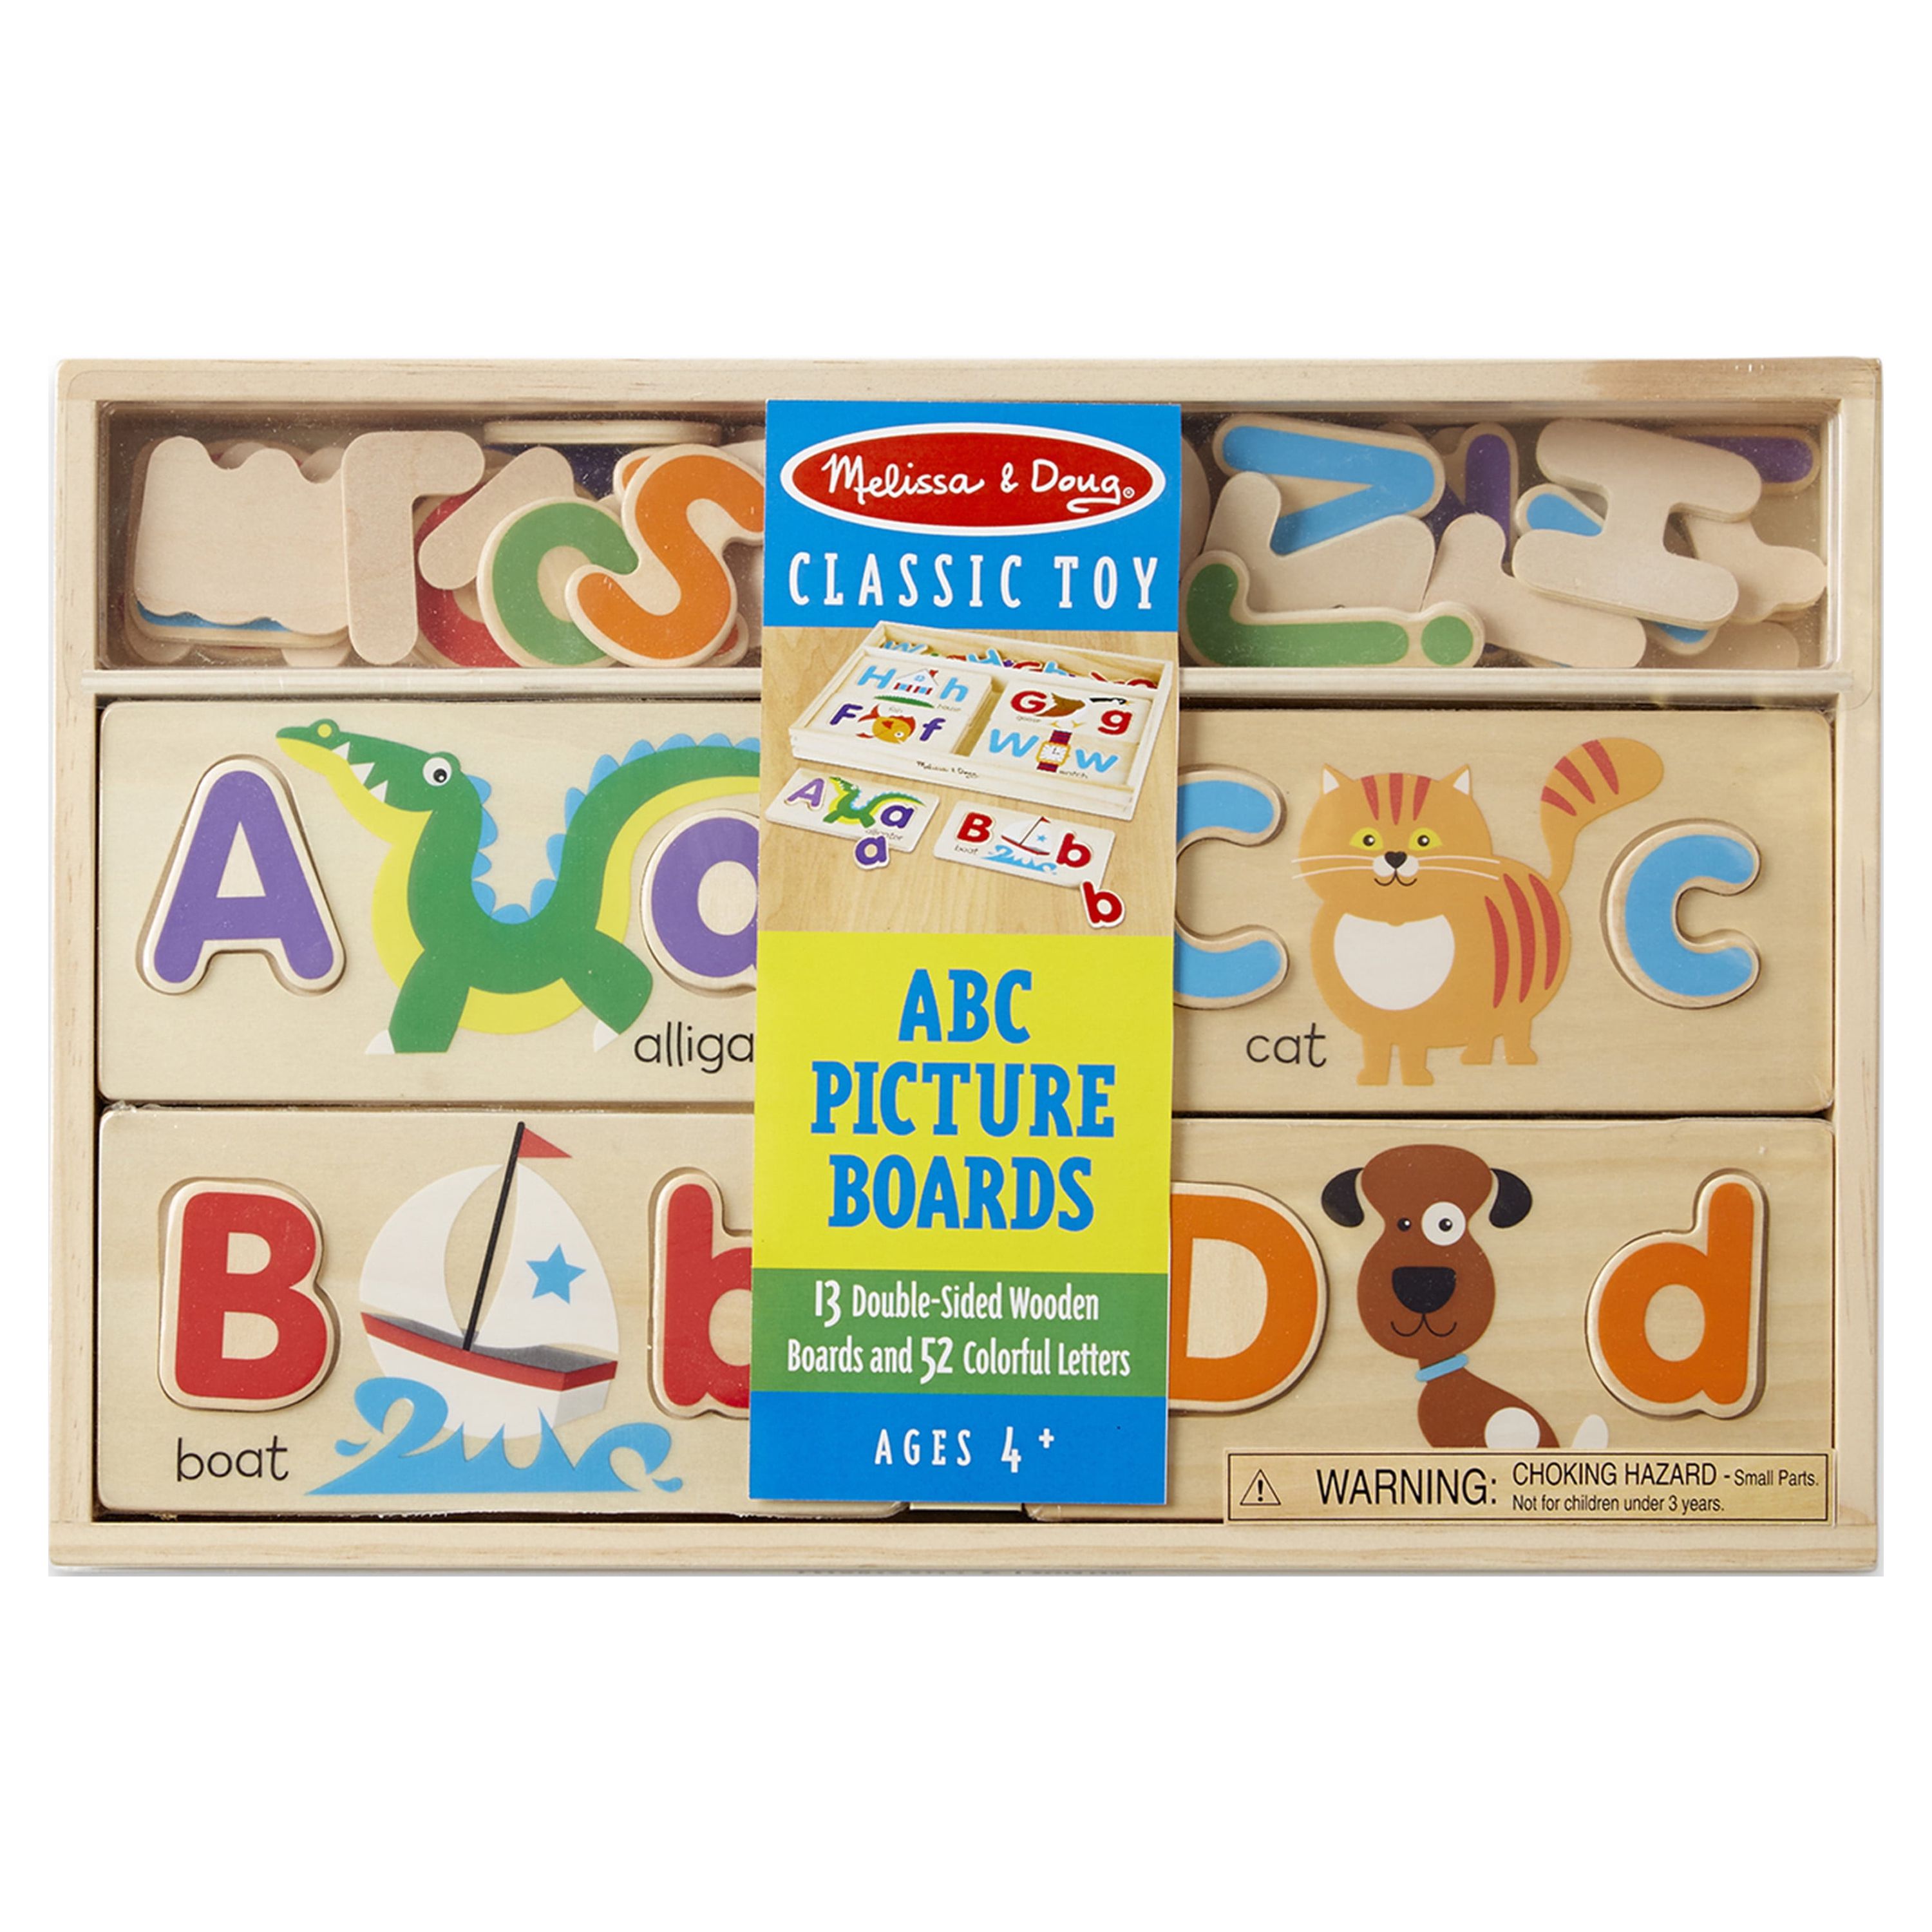 Melissa & Doug ABC Picture Boards - Educational Toy With 13 Double-Sided Wooden Boards and 52 Letters - image 3 of 9